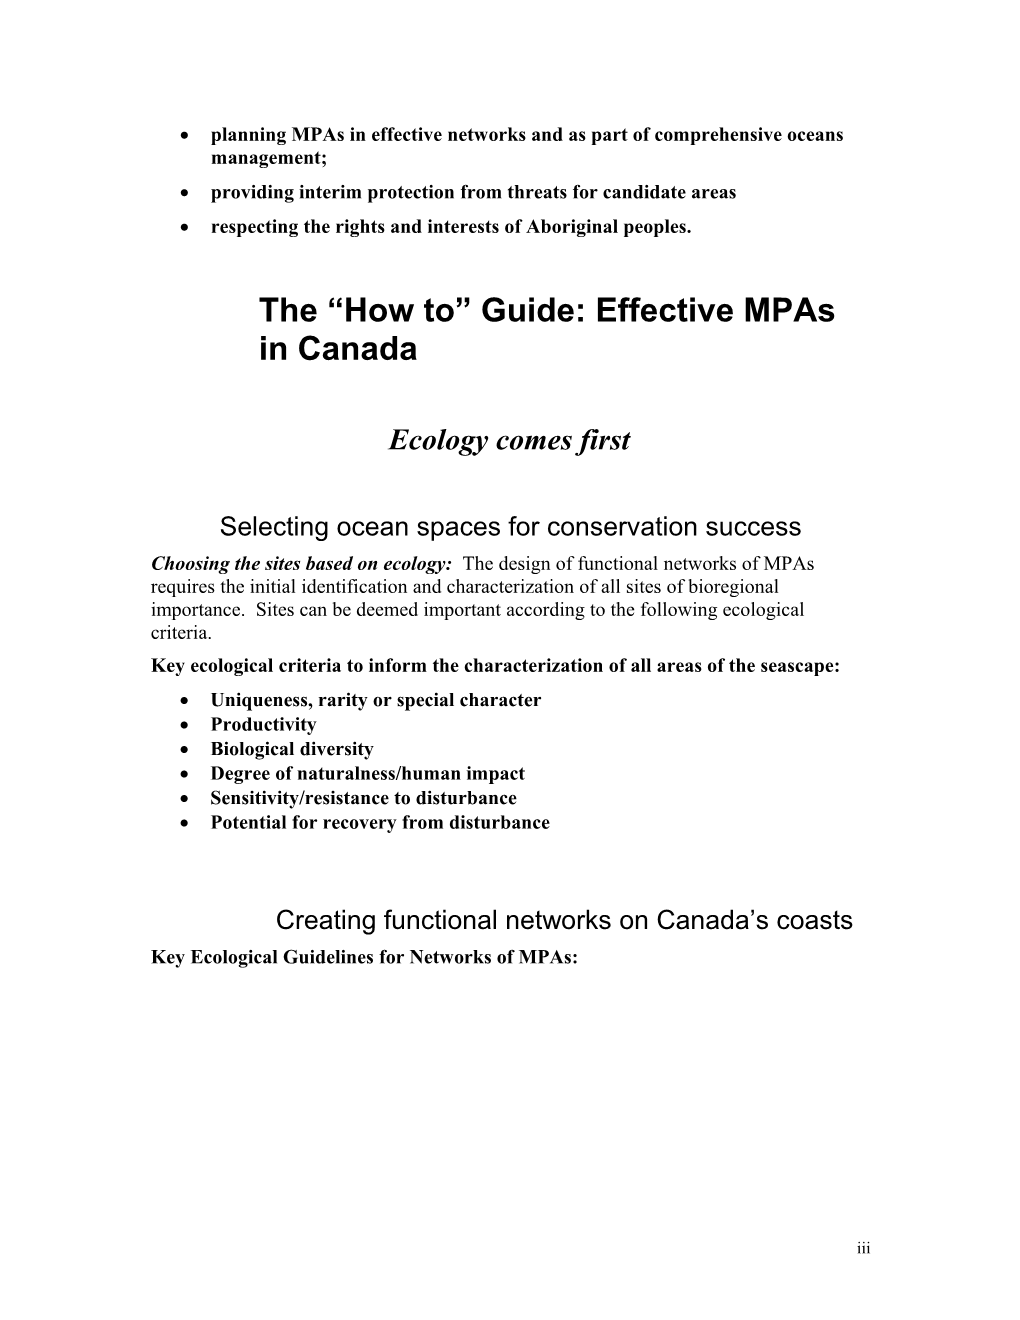 Science-Based Guidelines for Marine Protected Areas and MPA Networks in Canada